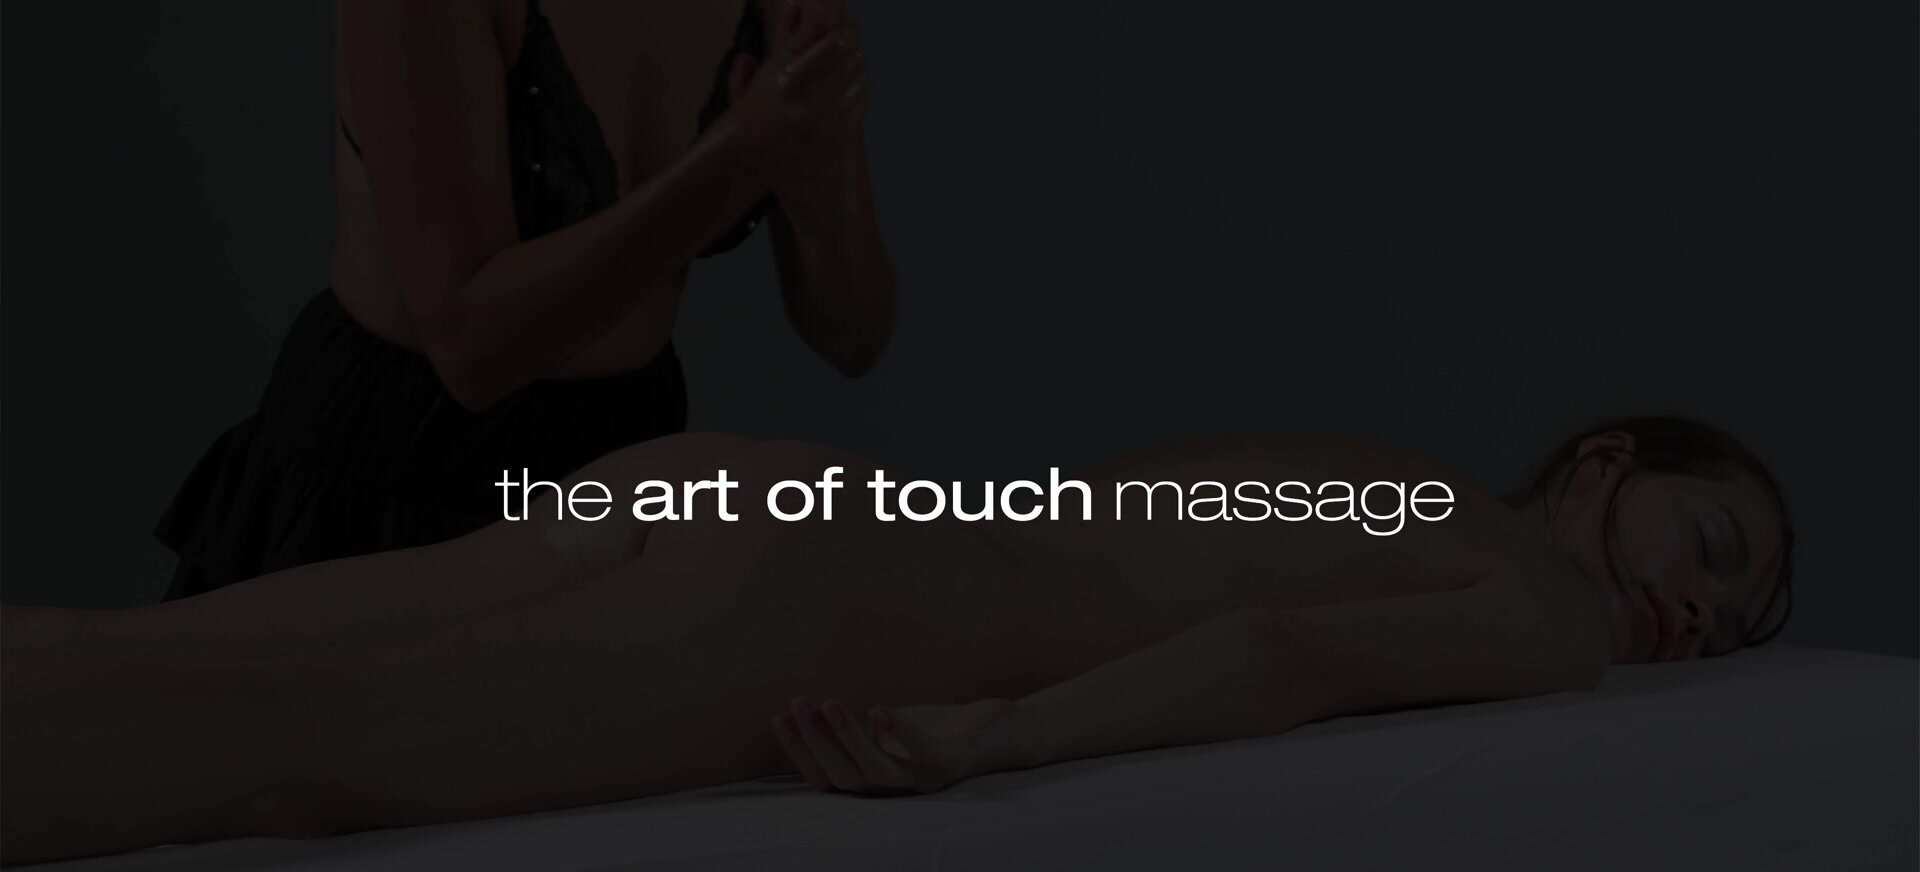 Hegre - Any Moloko - The Art Of Touch Massage